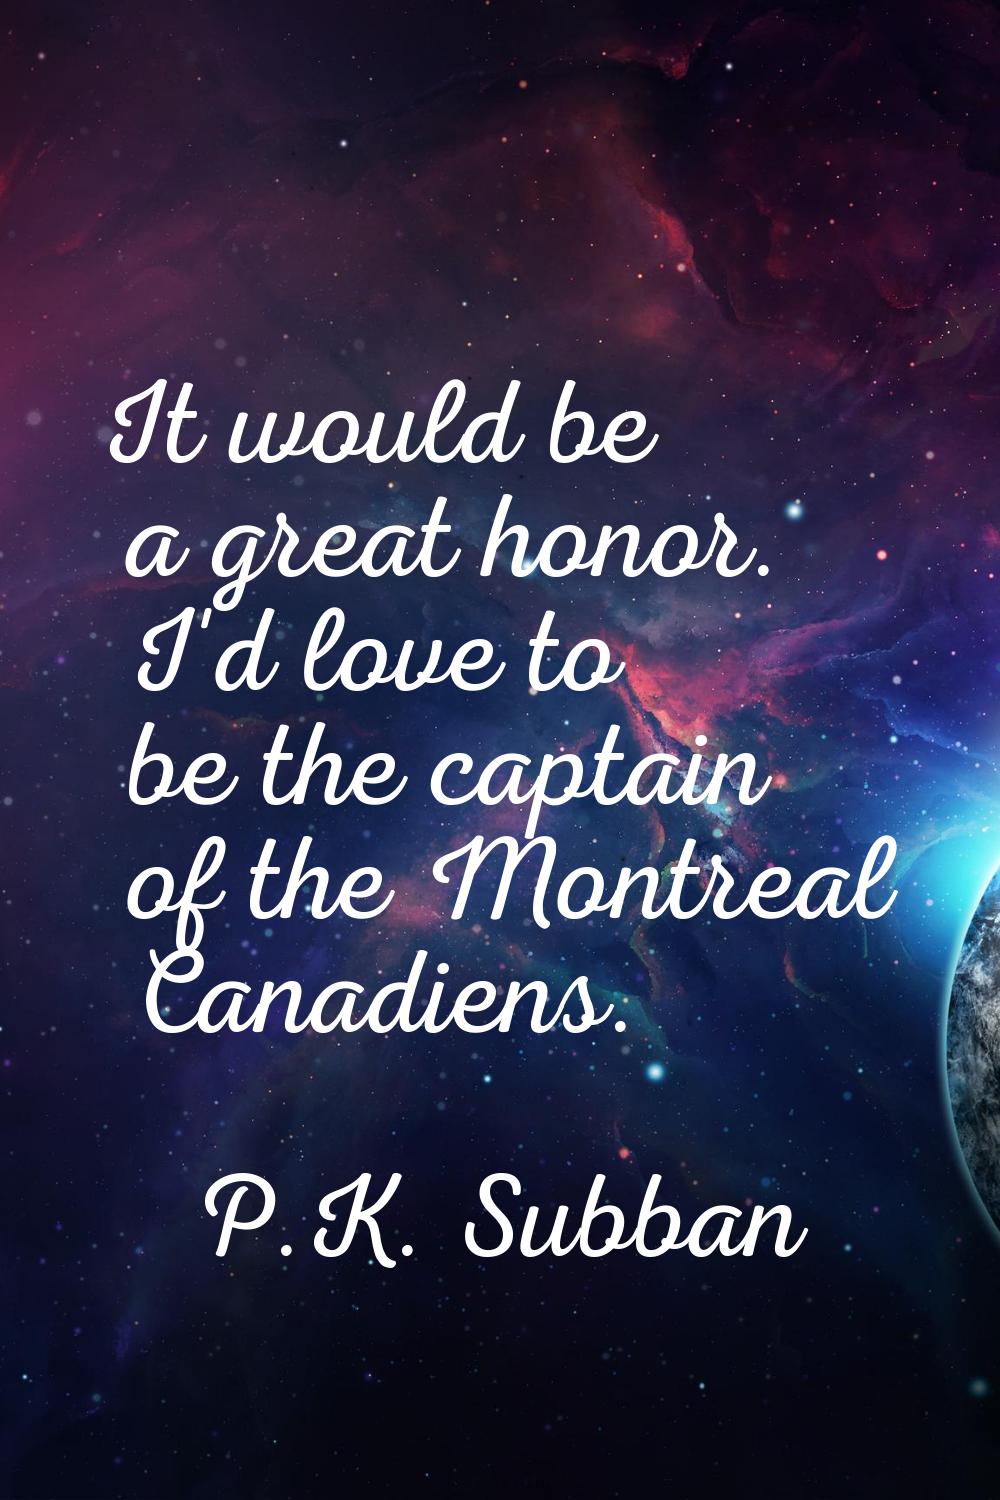 It would be a great honor. I'd love to be the captain of the Montreal Canadiens.